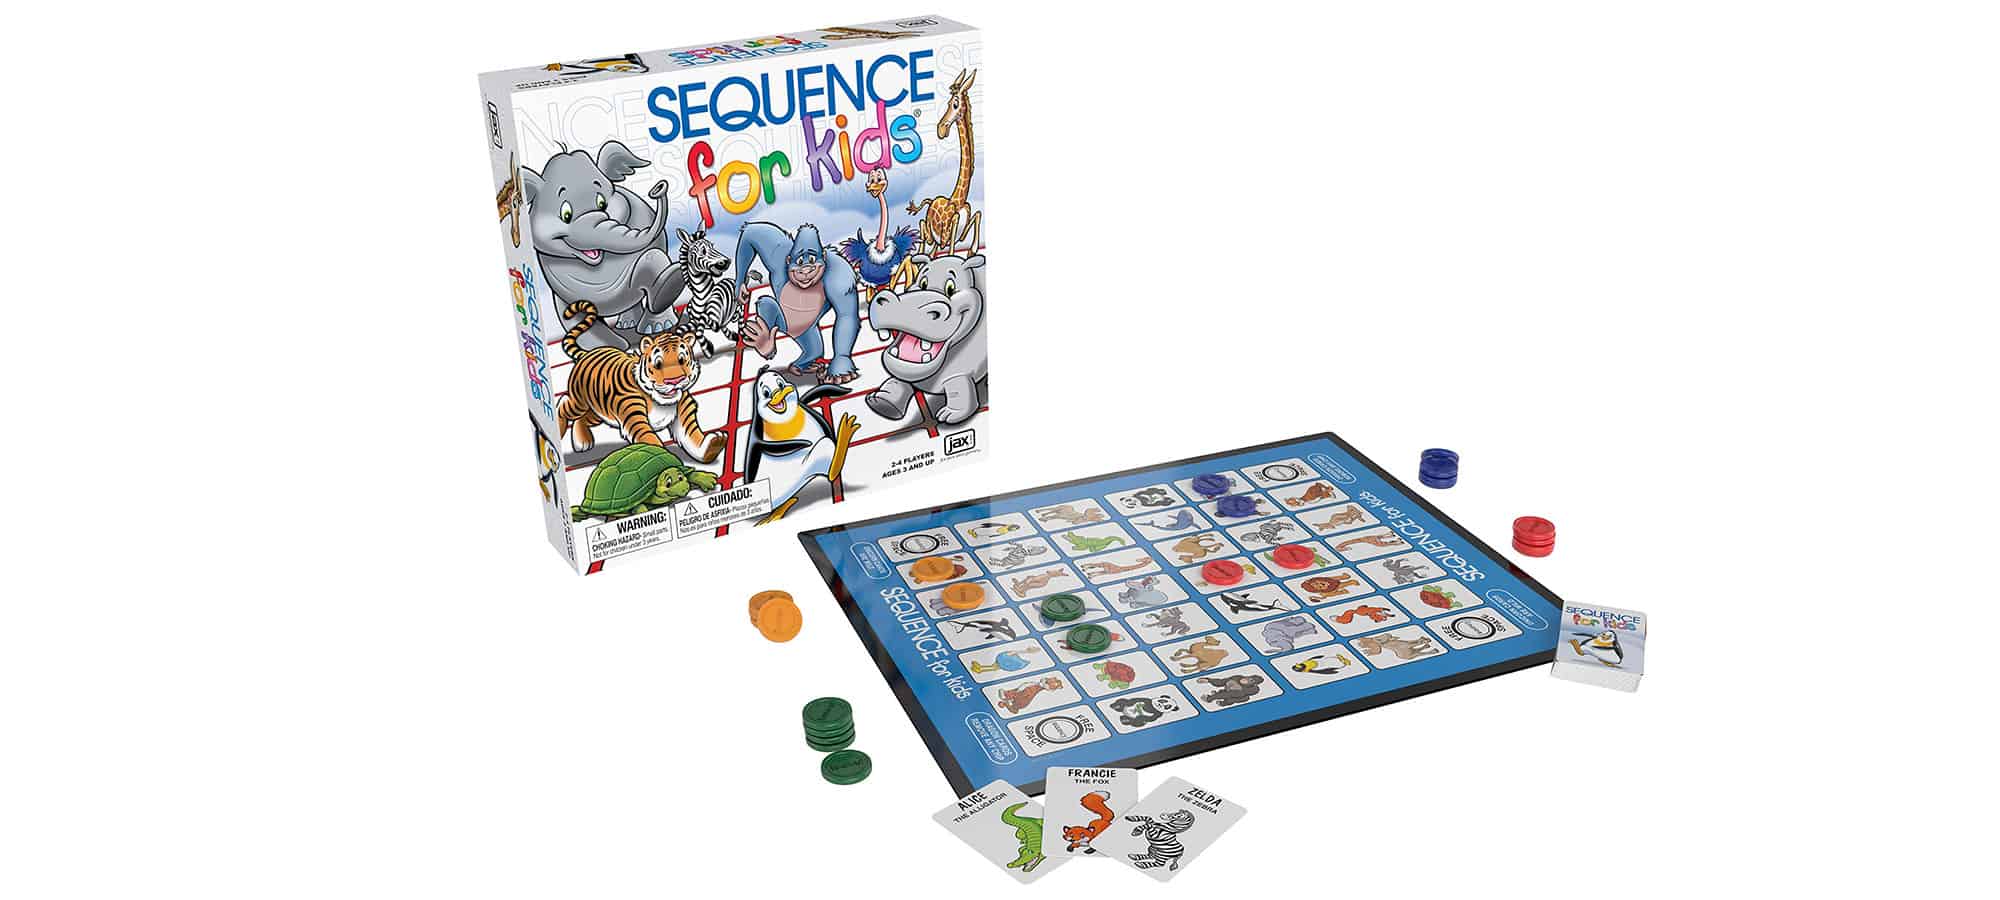 WIN The Sequence for Kids